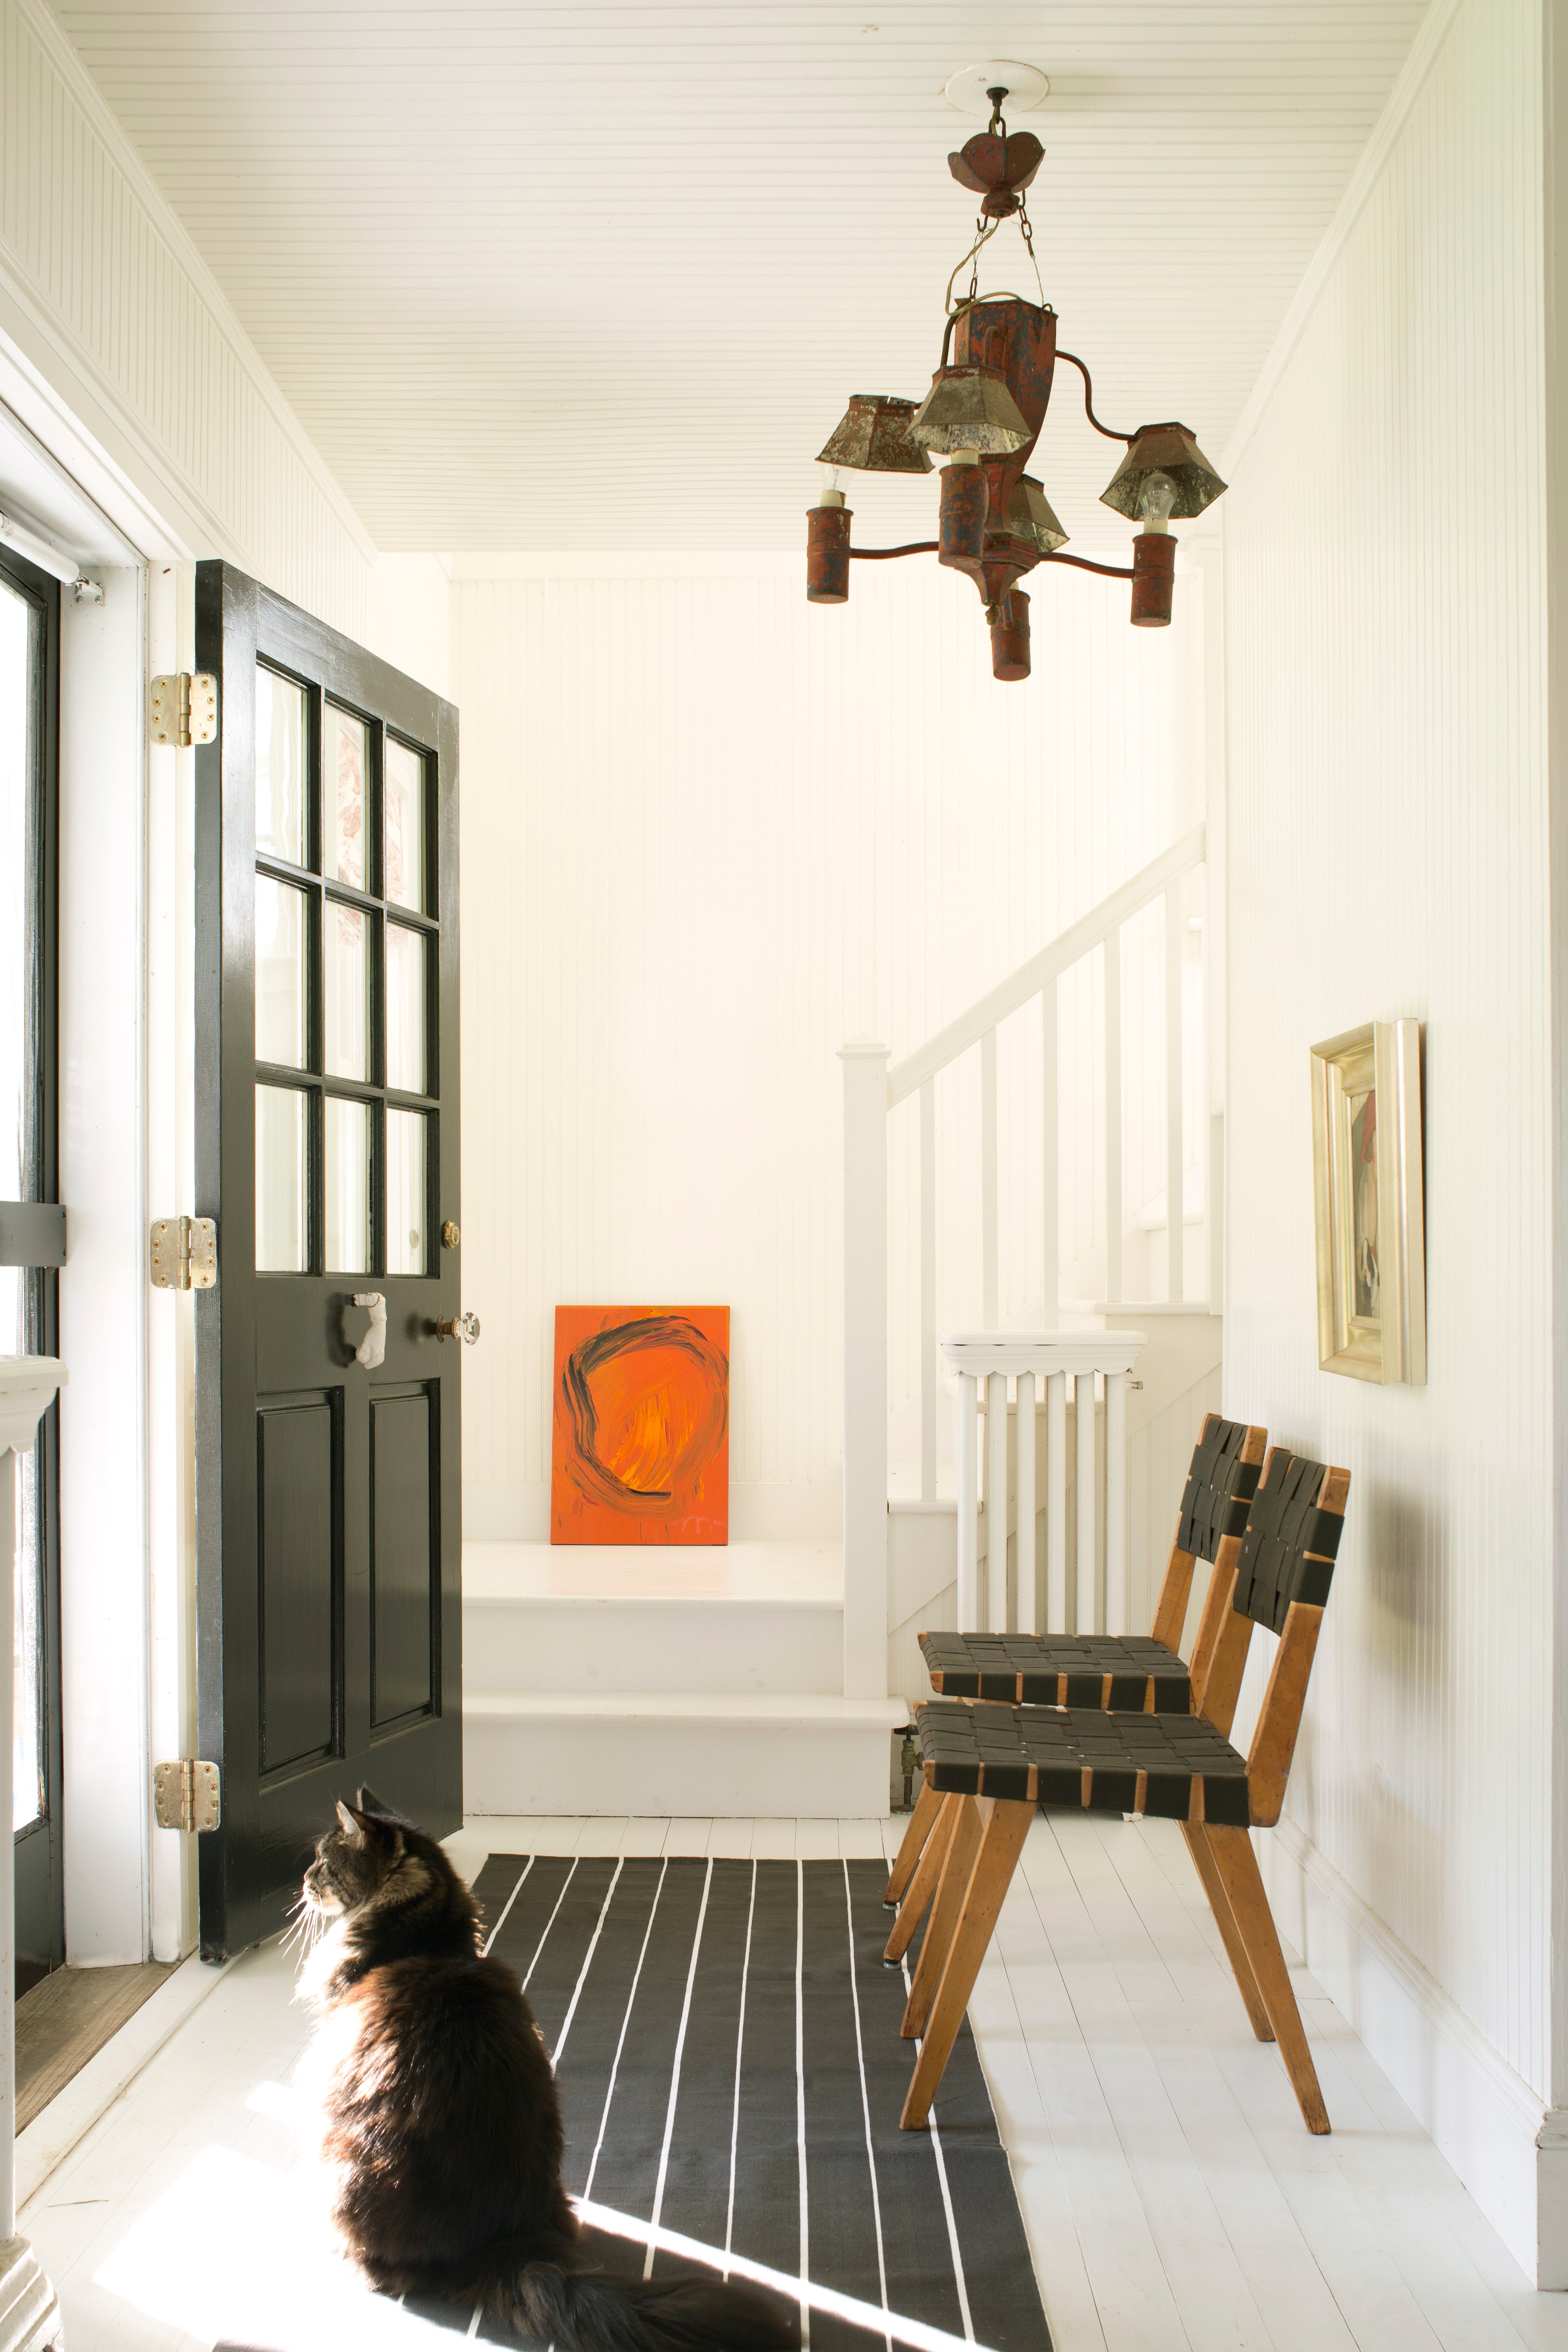 BM White Dove OC-17 is a bright, warm paint color in a well-lit entrance